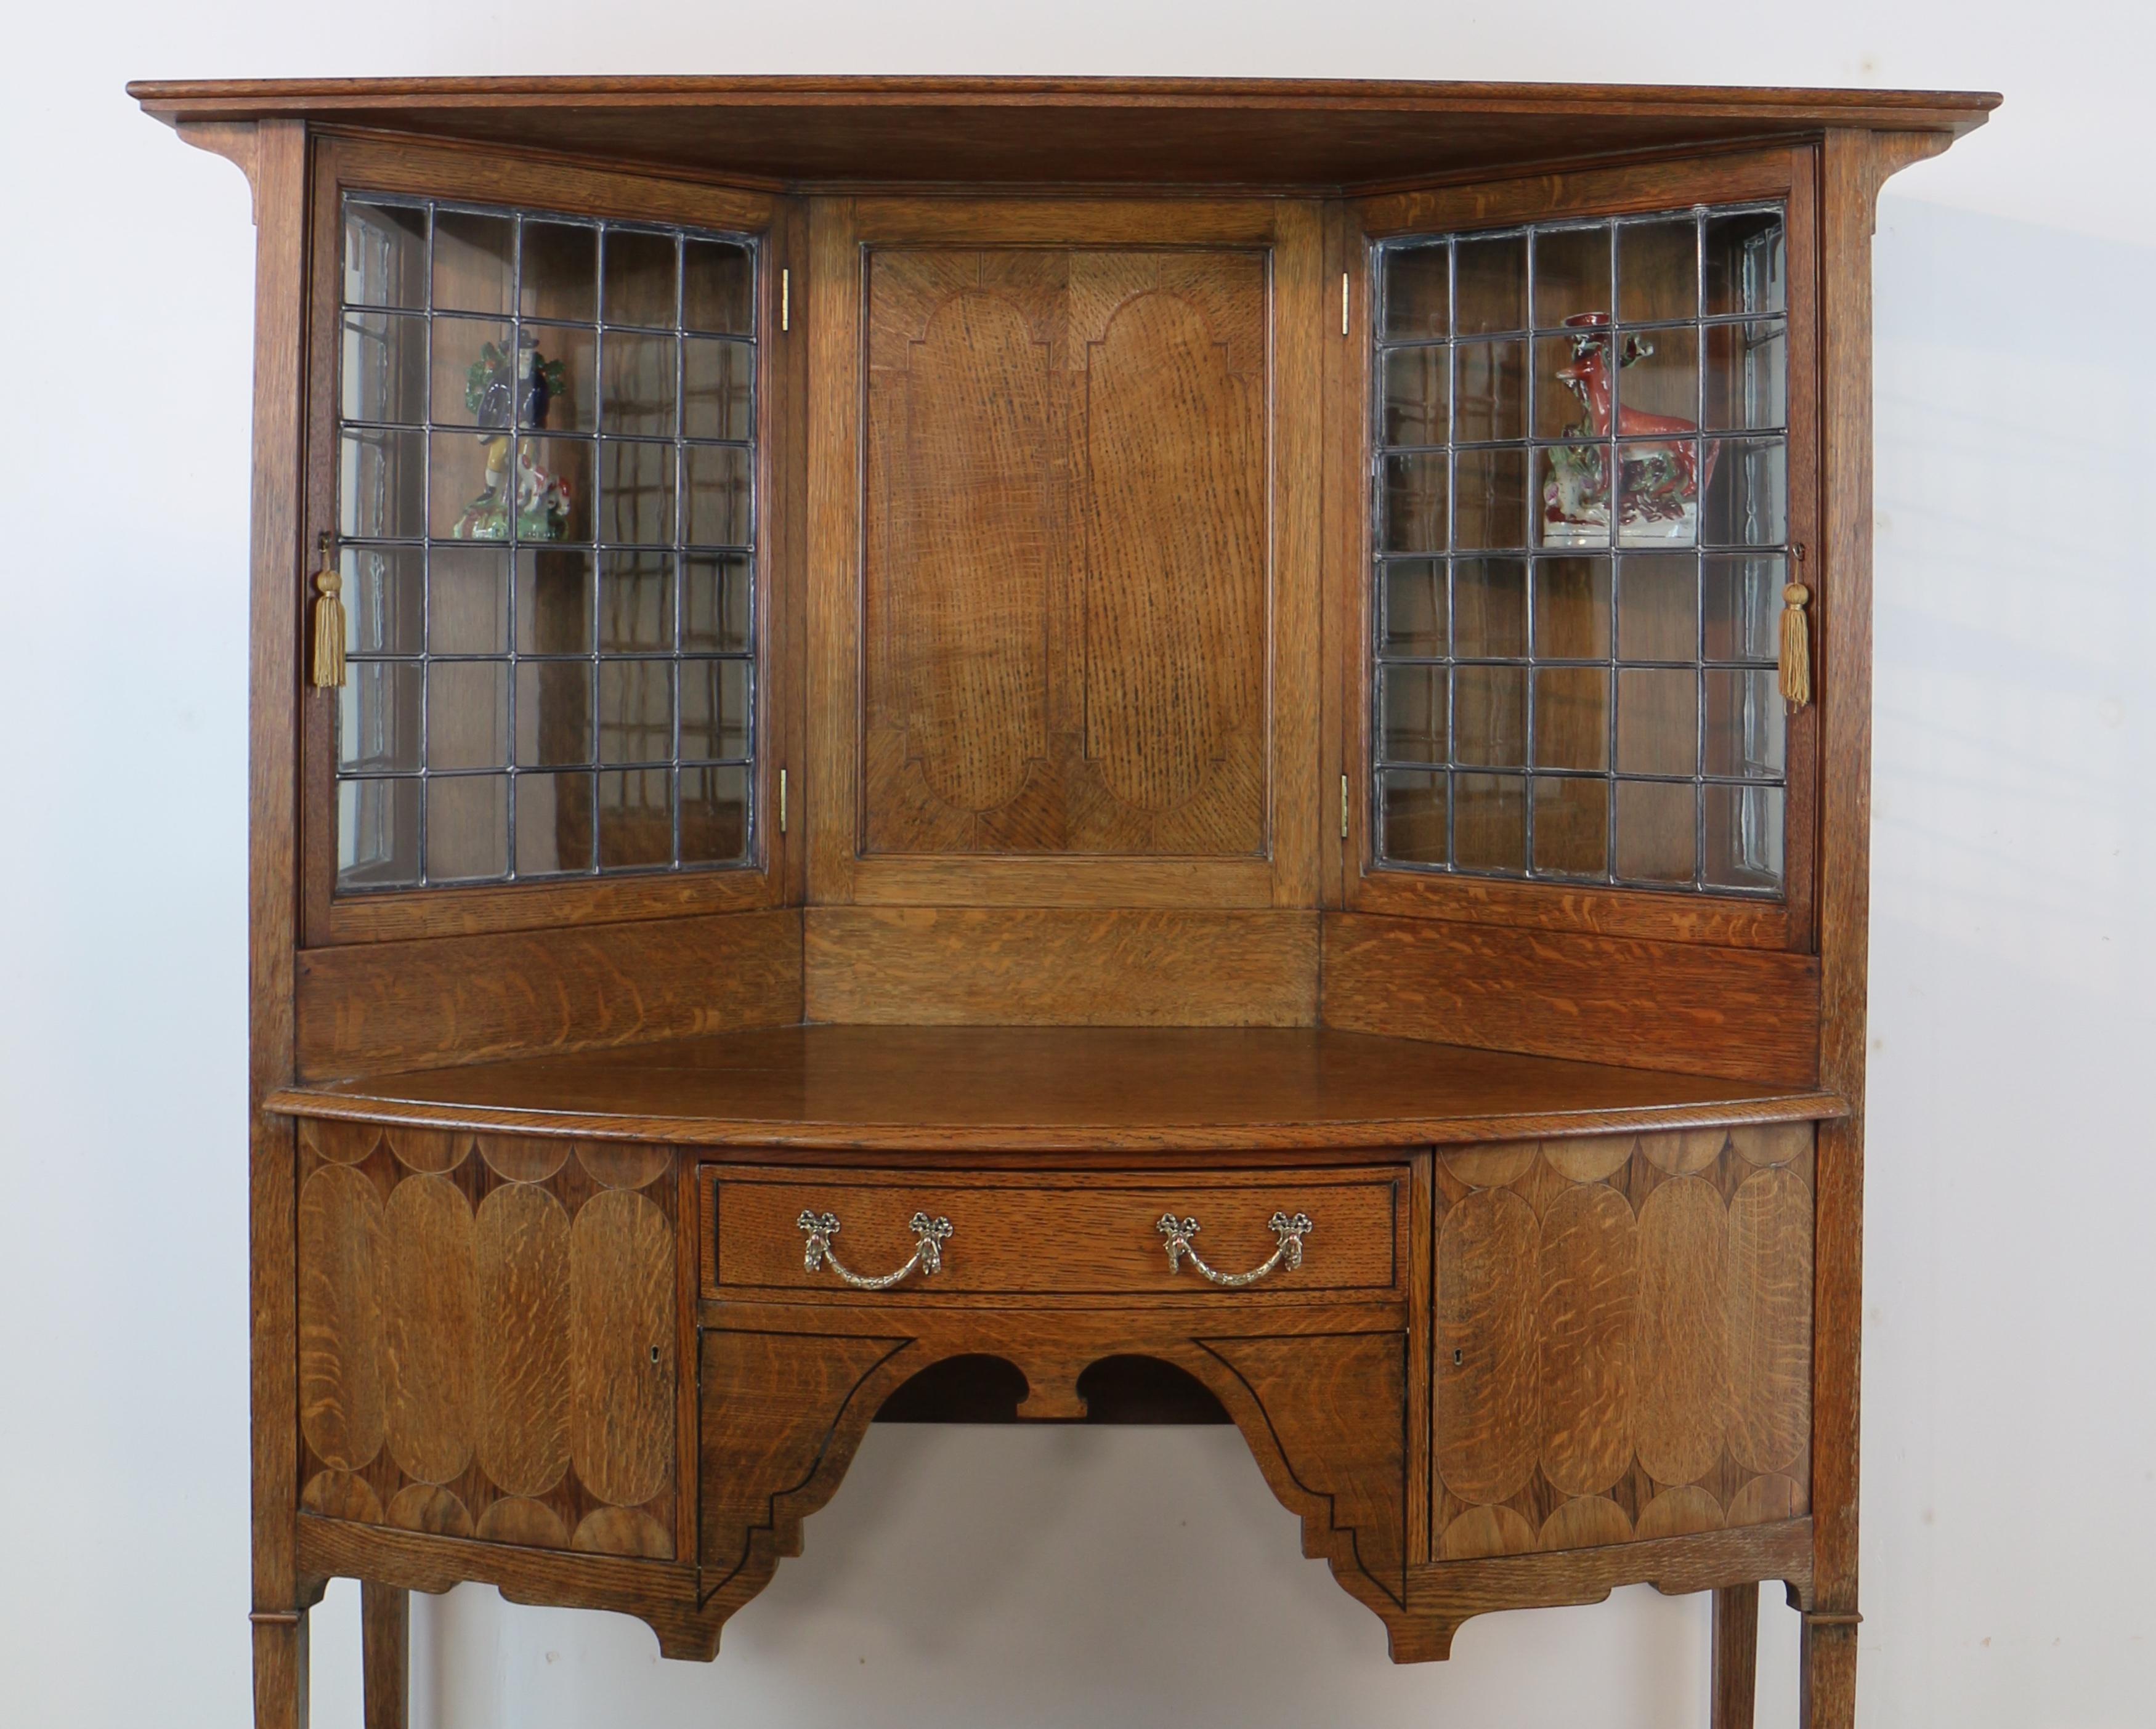 Arts and Crafts Antique English Bath Cabinet Makers Arts & Crafts Oak & Inlaid Sideboard Cabinet